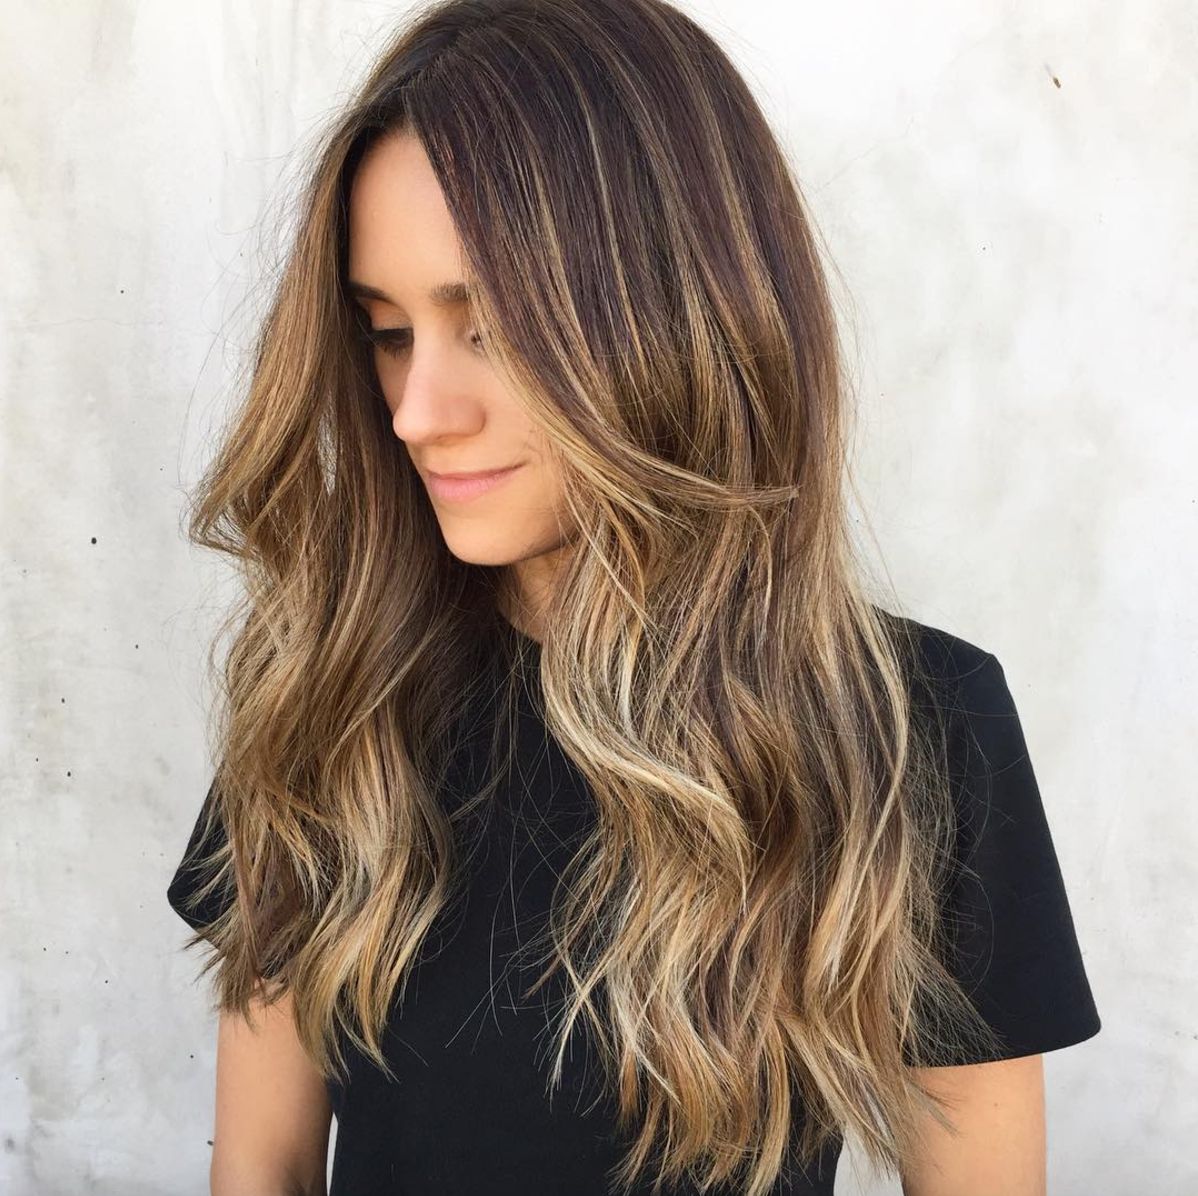 39 Balayage Hair Ideas For Brown Hair, Blonde Hair & More | Glamour With Most Popular Layered Haircuts With Warm Balayage (View 7 of 25)